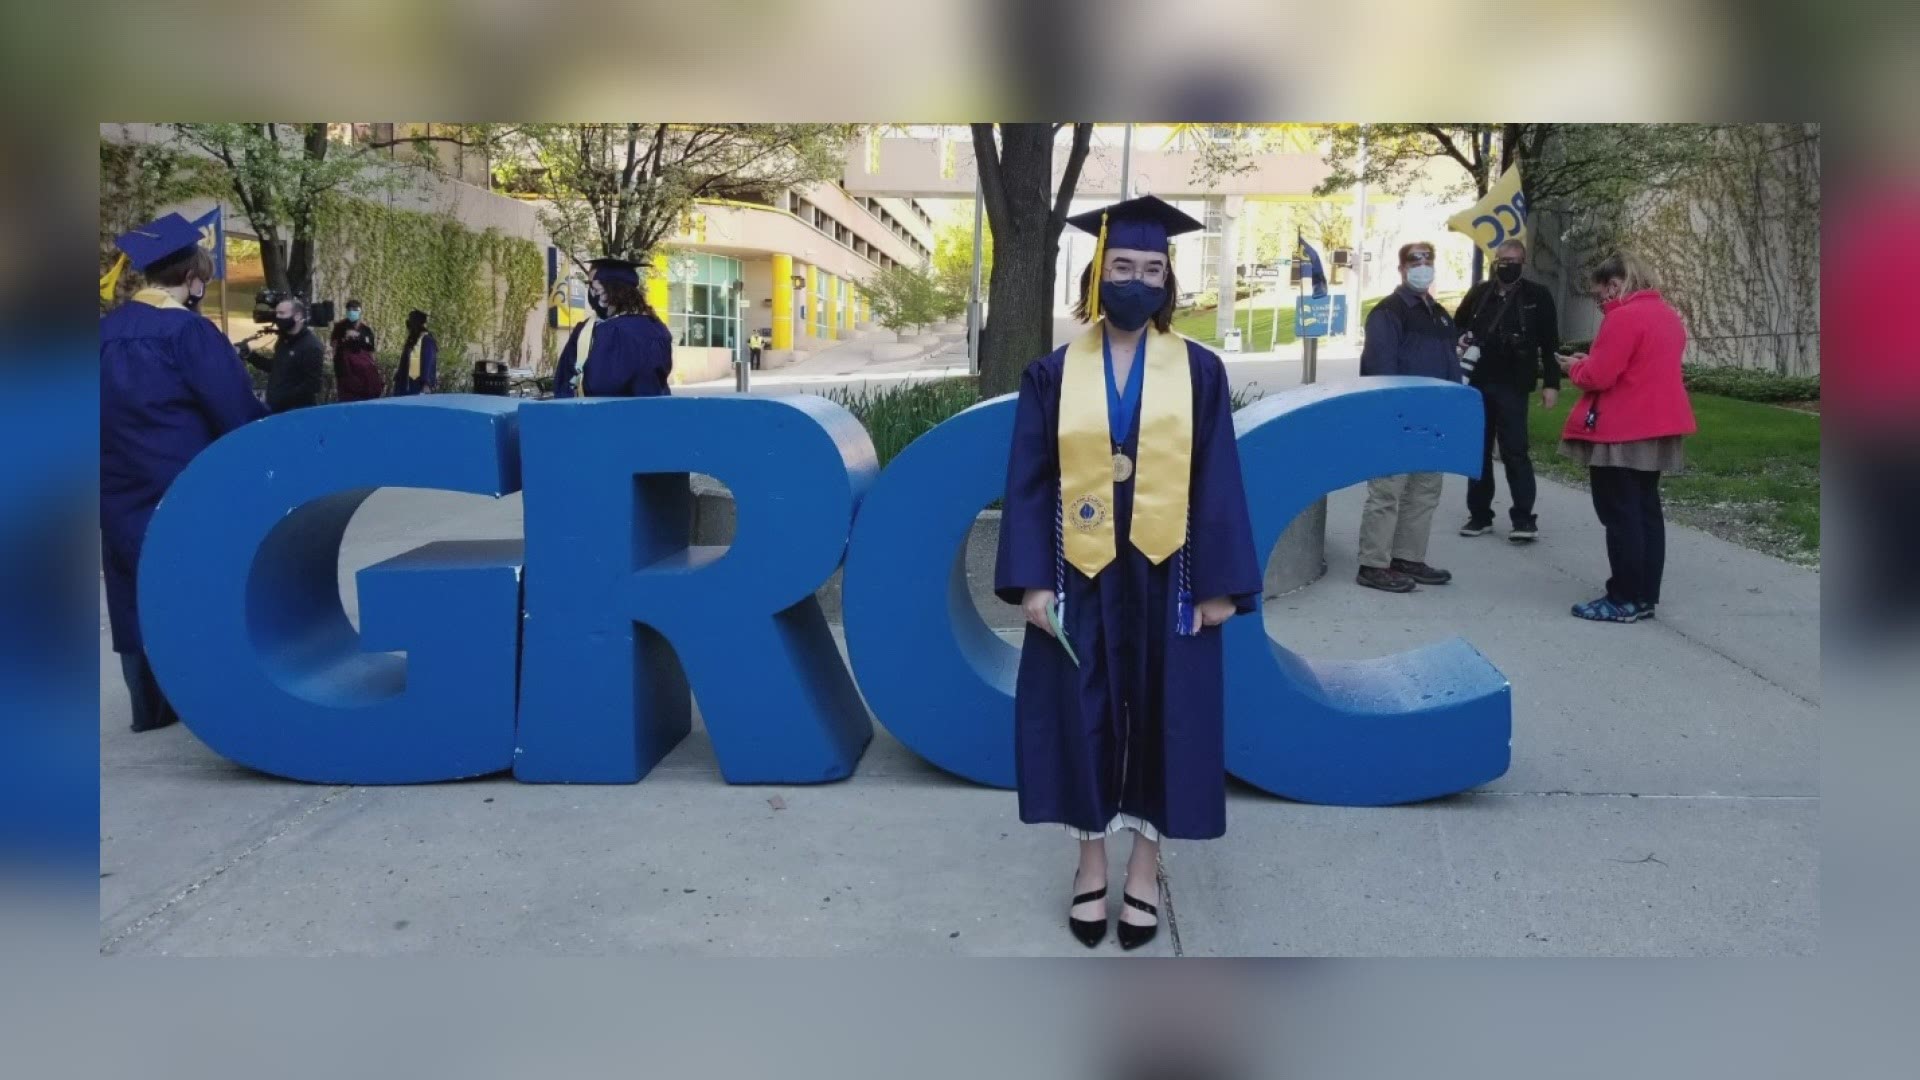 Voca Ford, a Tri County High School senior, started taking college classes when she was 12 years old and has now earned her Associate's degree from GRCC.